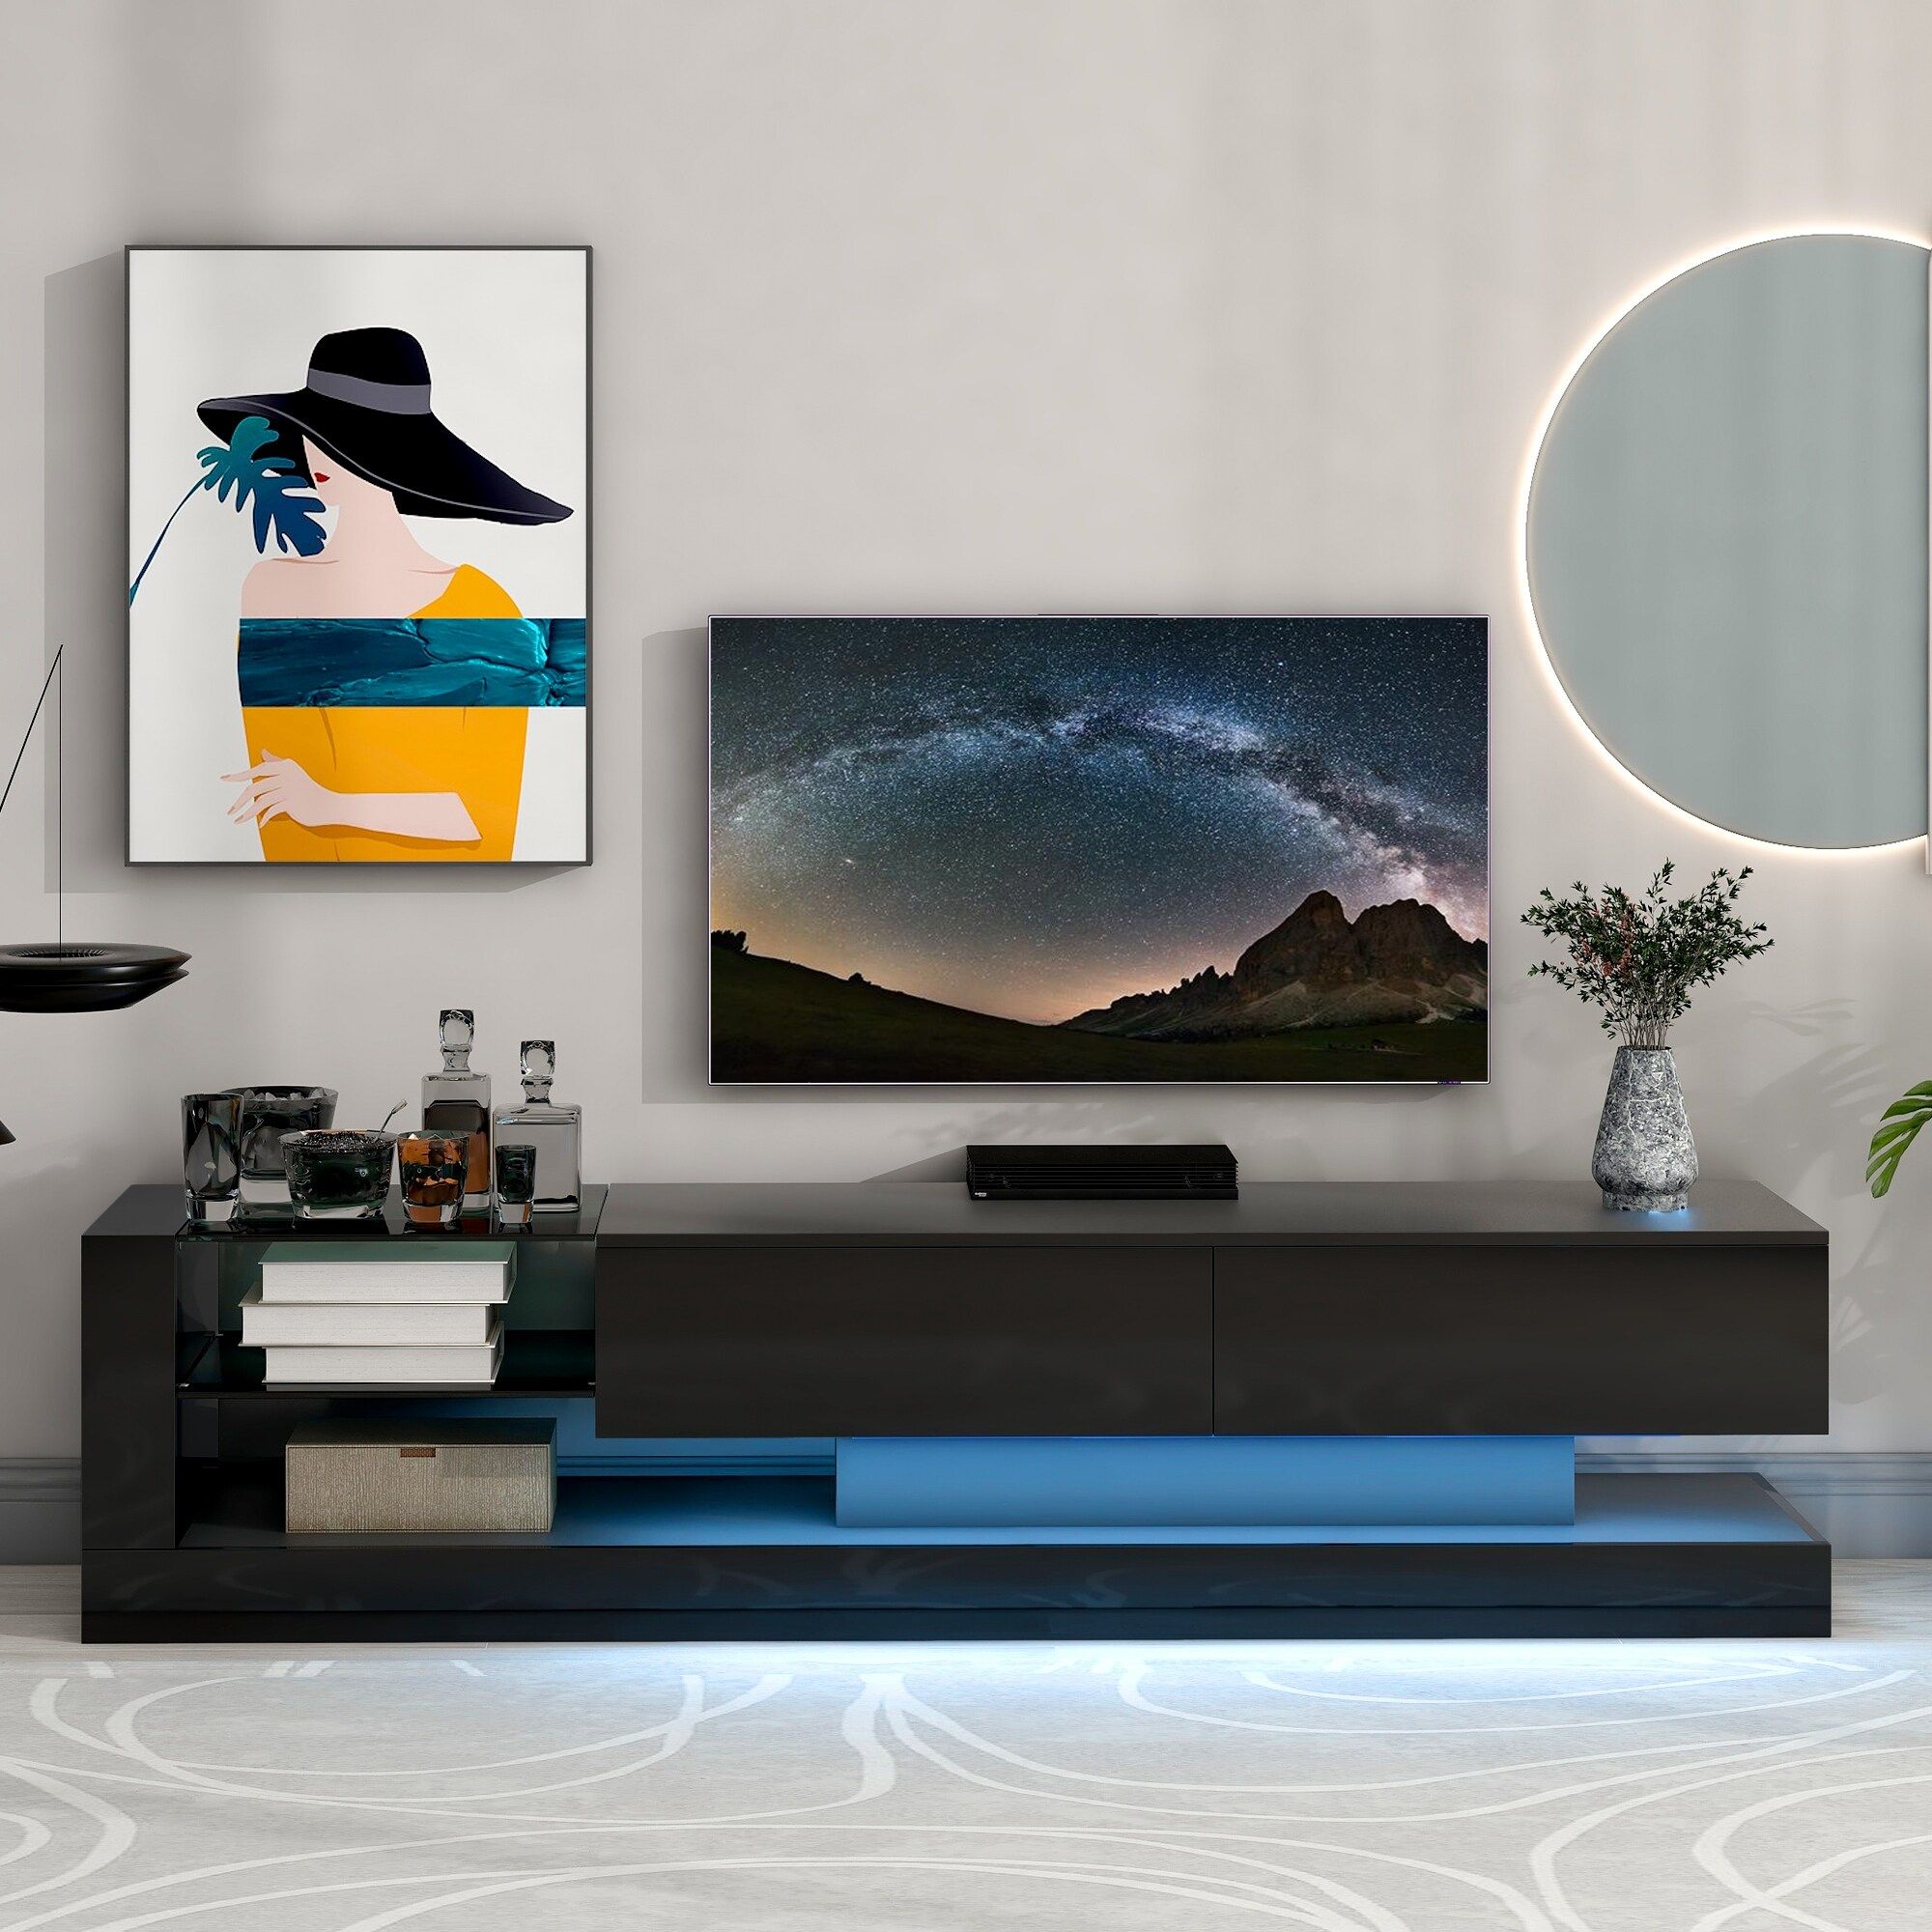 Black Modern Tv Stand With 16 Color Rgb Led Strip Lights (fits 75" Tv) –  Bed Bath & Beyond – 38353746 Inside Rgb Entertainment Centers Black (Photo 1 of 15)